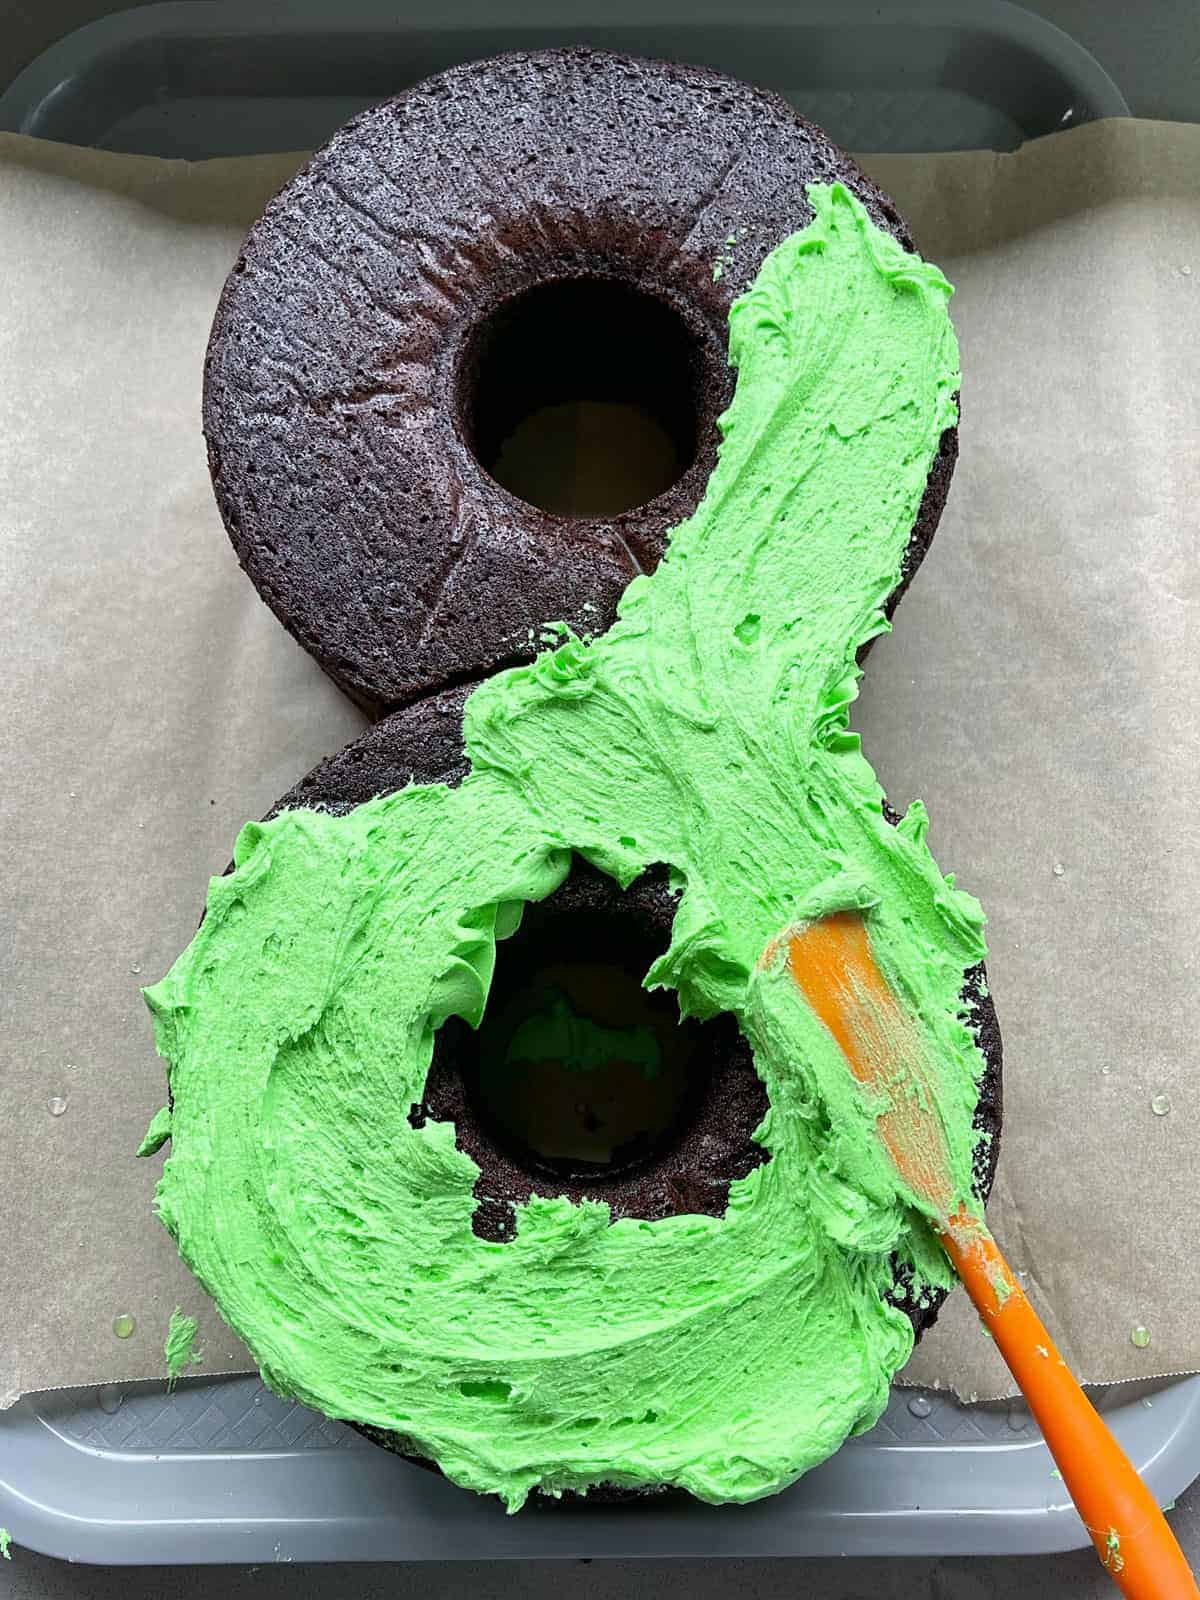 A chocolate cake being iced with green buttercream icing.